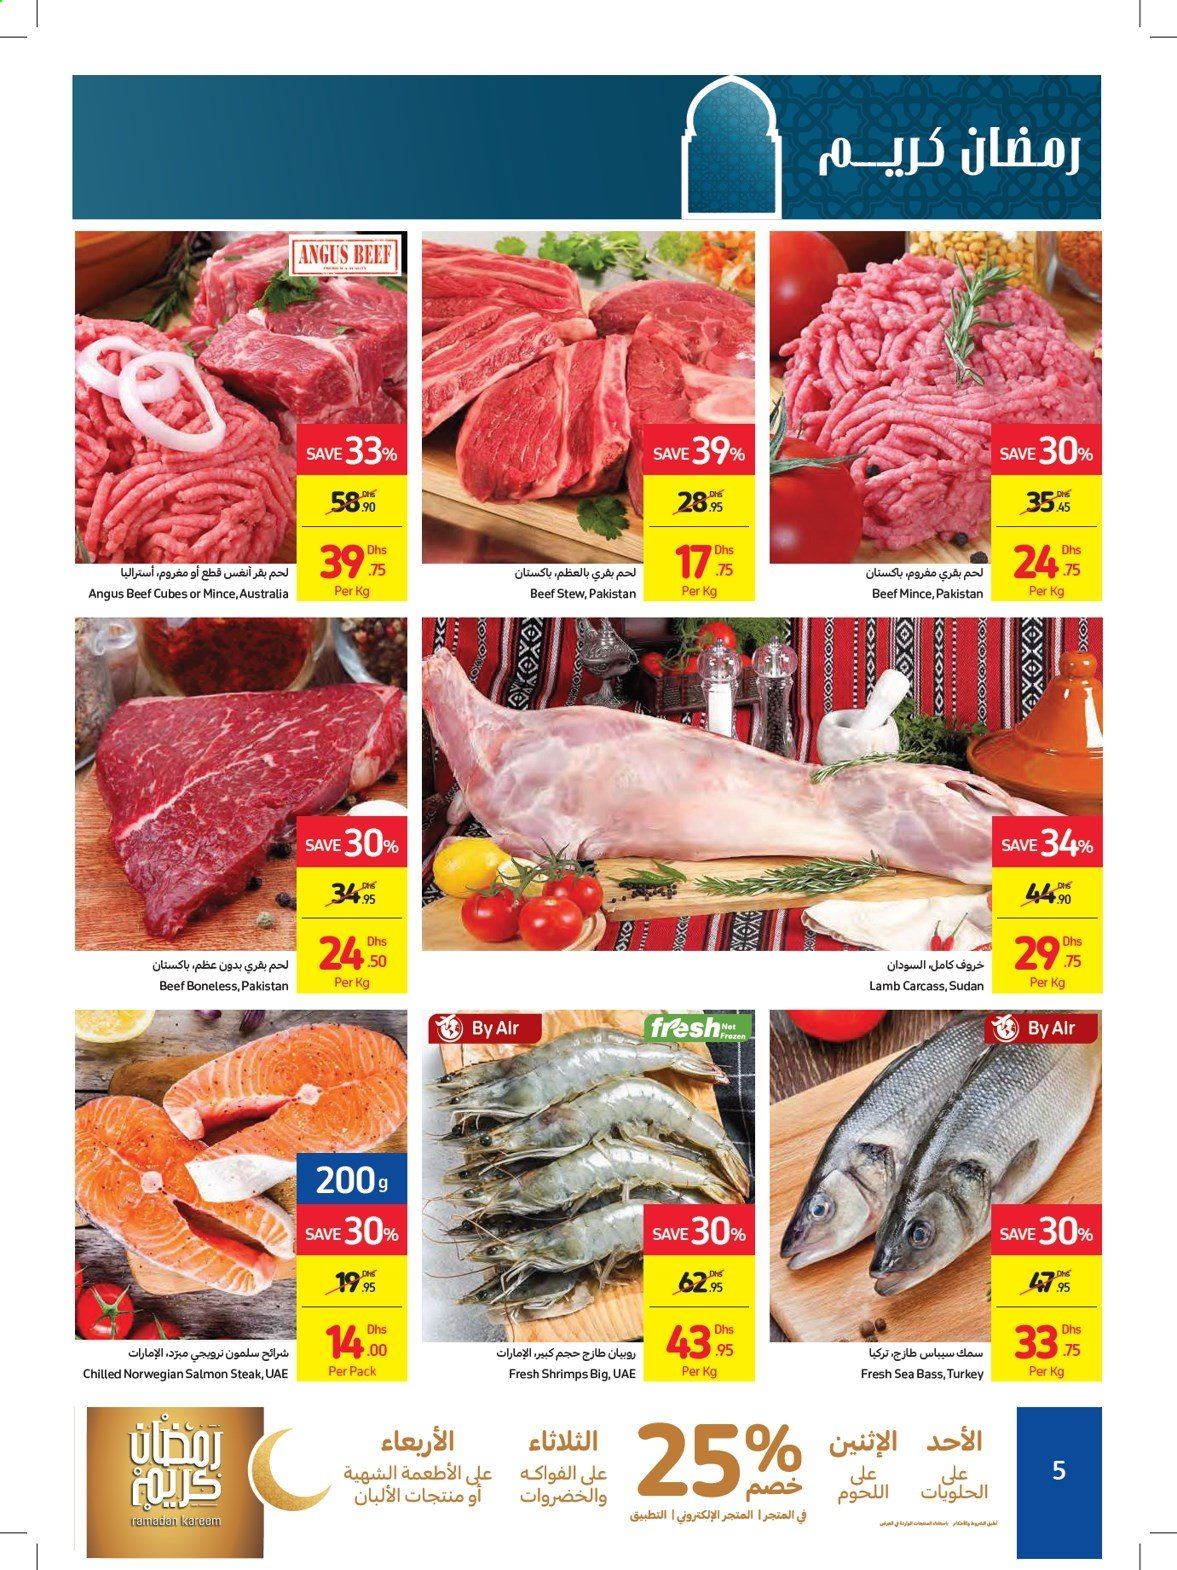 Carrefour offer - 18/03/2021 - 27/03/2021.